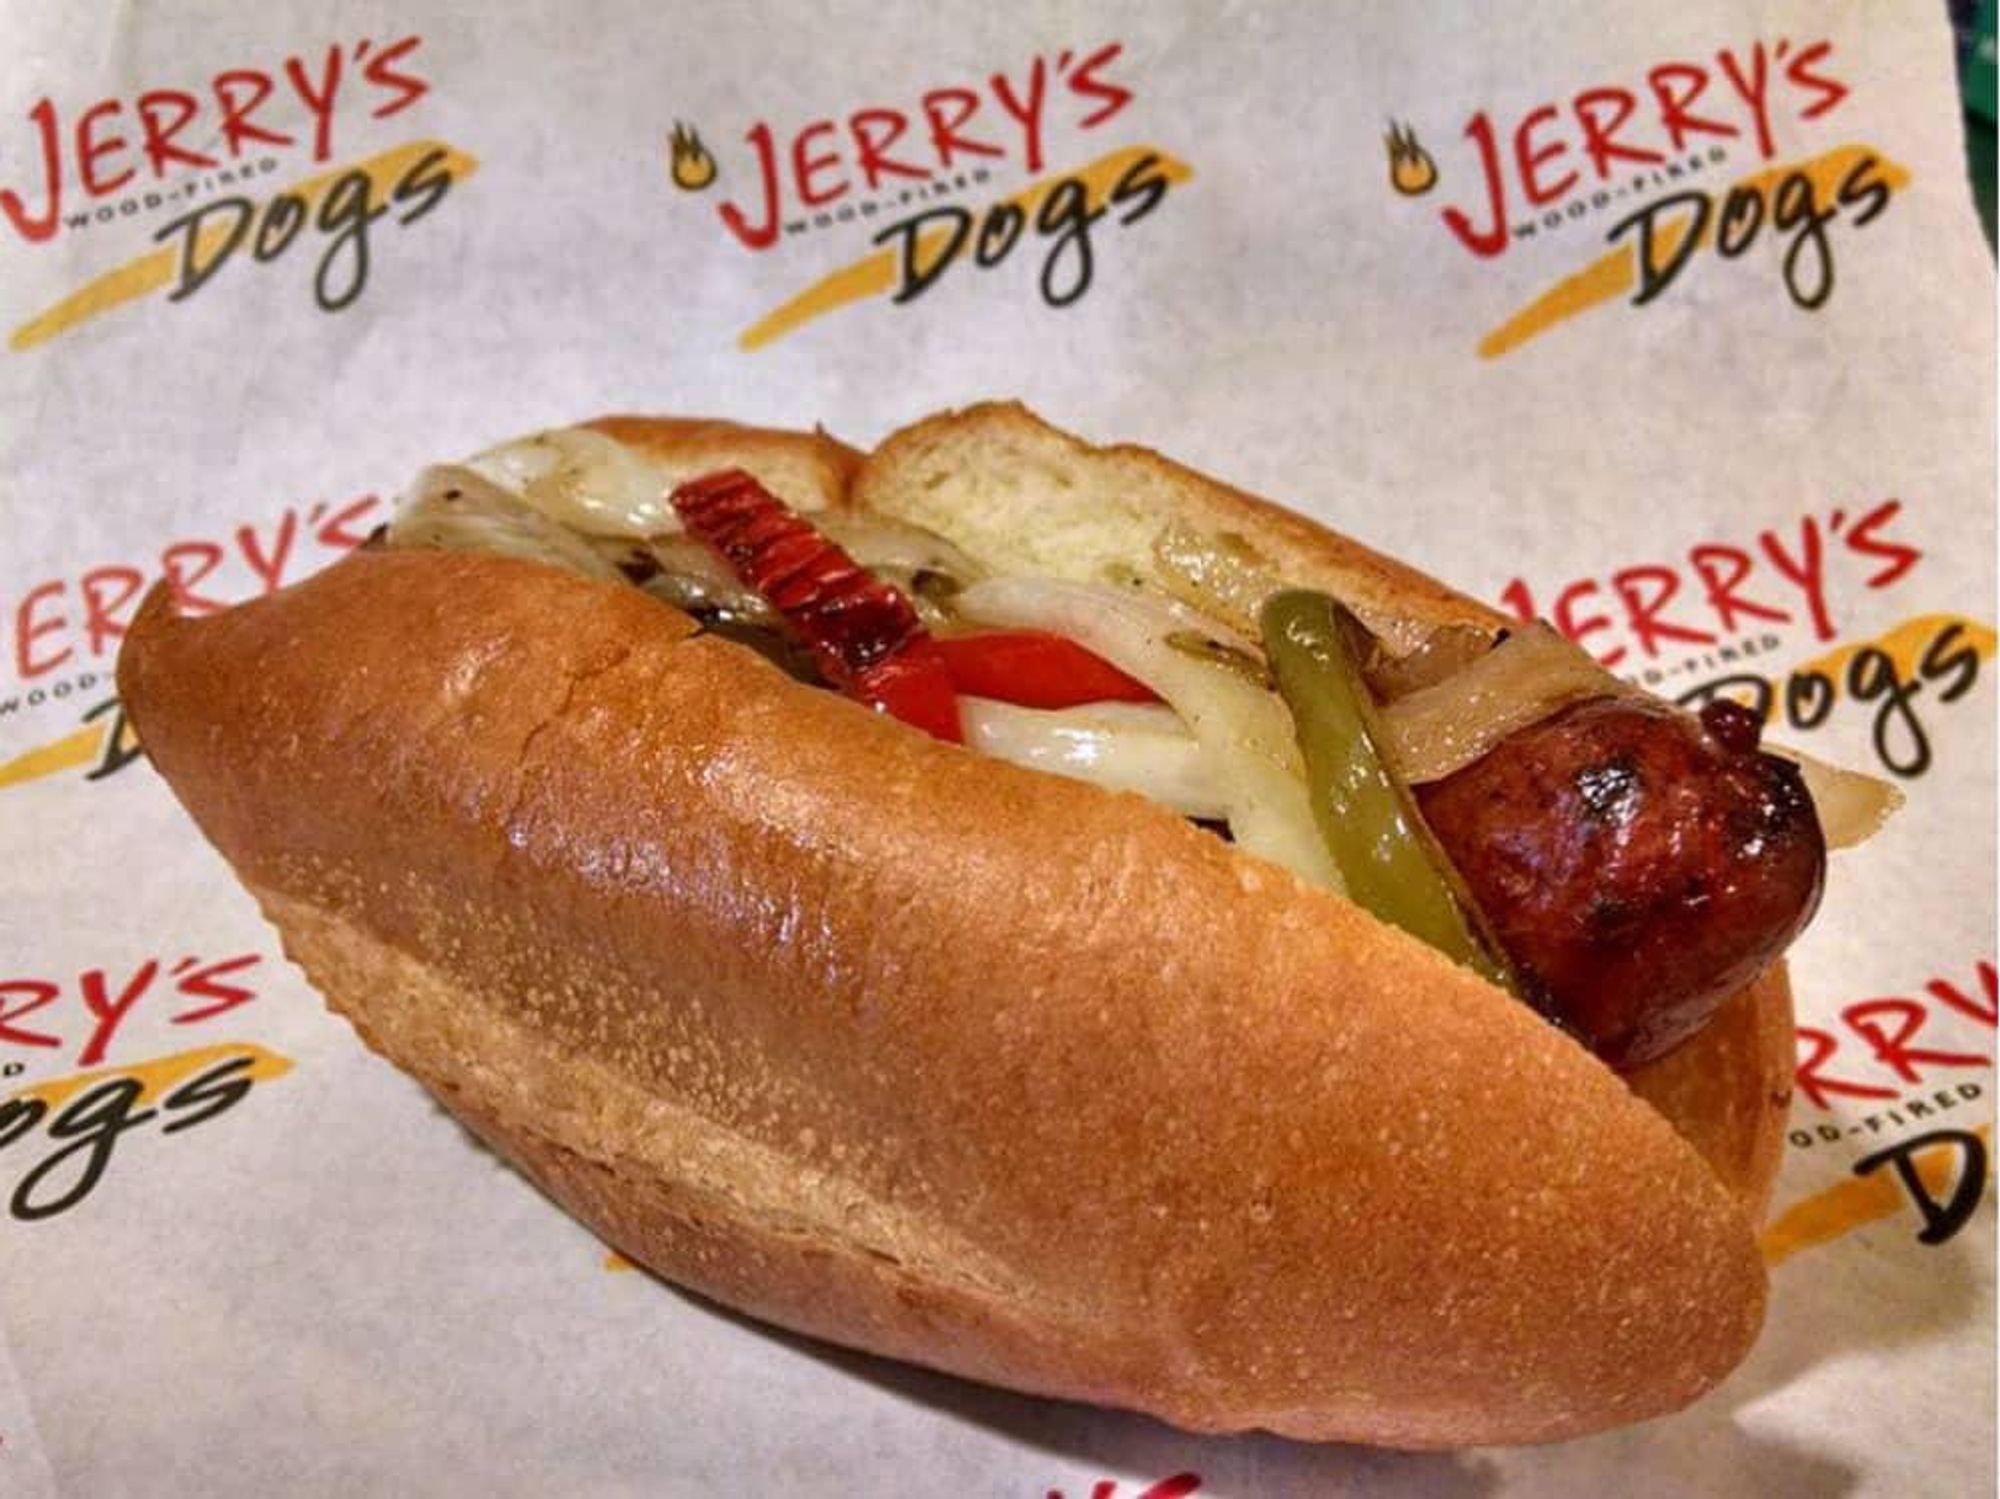 Jerry's Wood-Fired Dogs